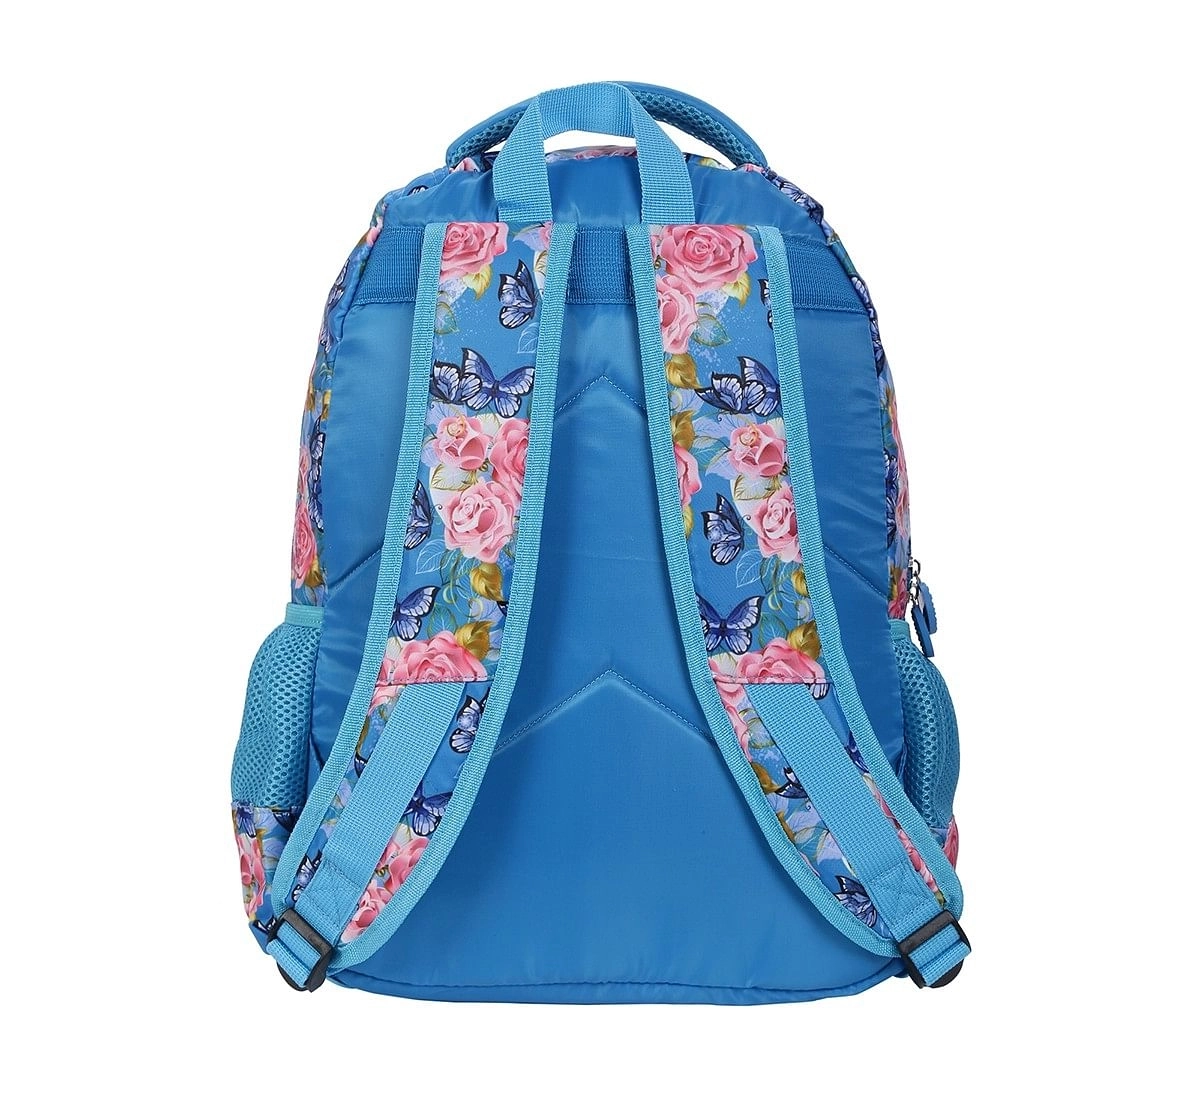 Disney Princess Travel In Style 16" Backpack Bags for age 3Y+ 